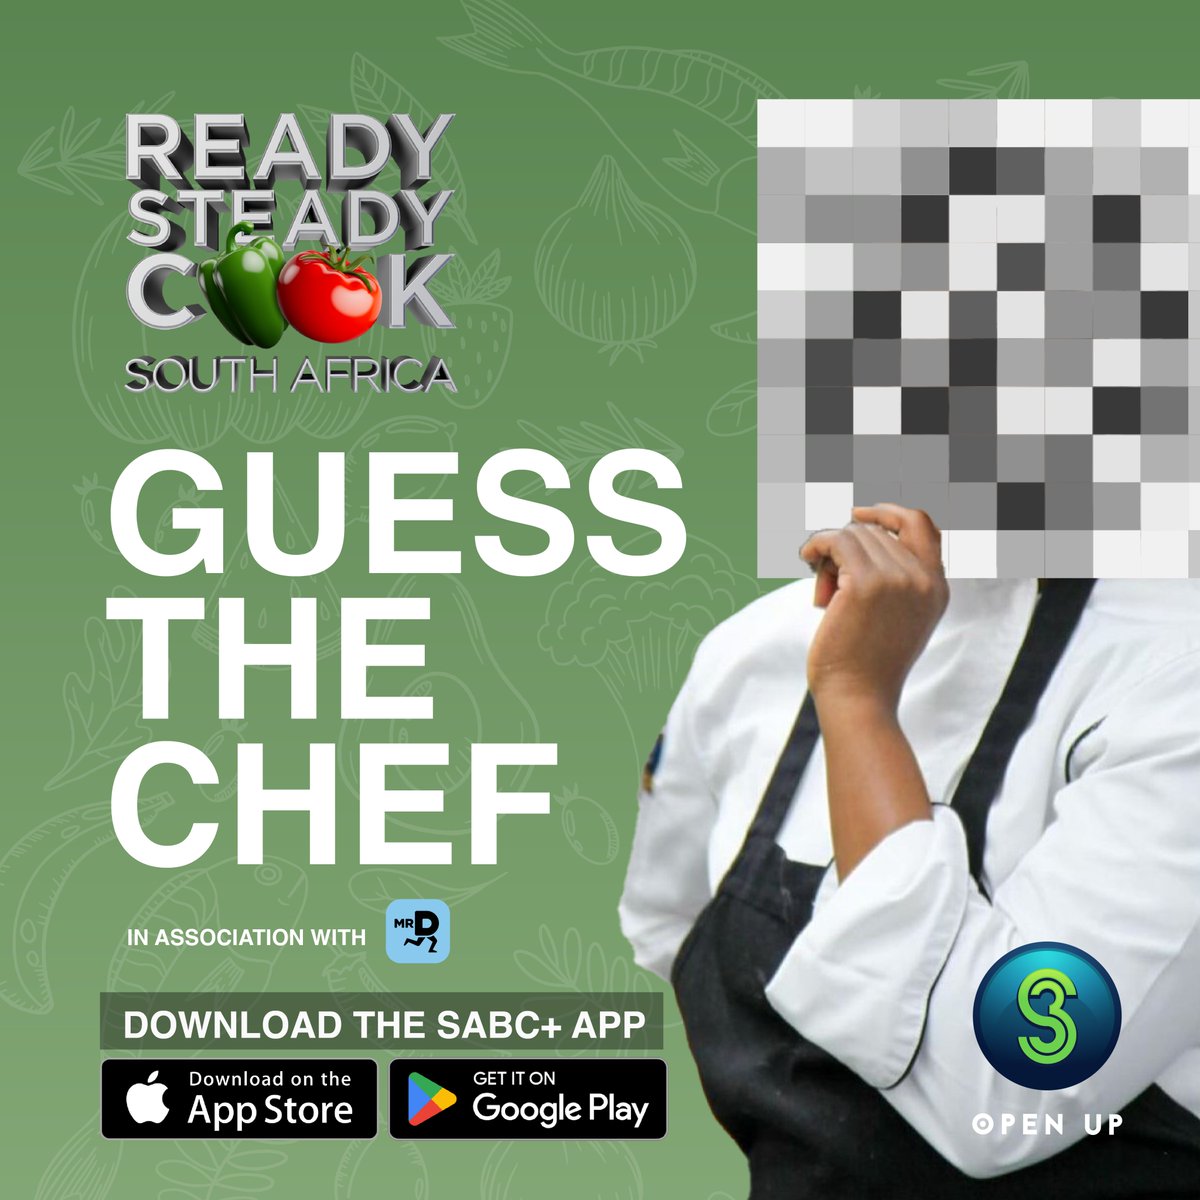 Tag a chef you would like to see as our guest on the next episode of #ReadySteadyCookSA.

#ChannelABetterYou 
#NewEntertainment #S3OpenUp